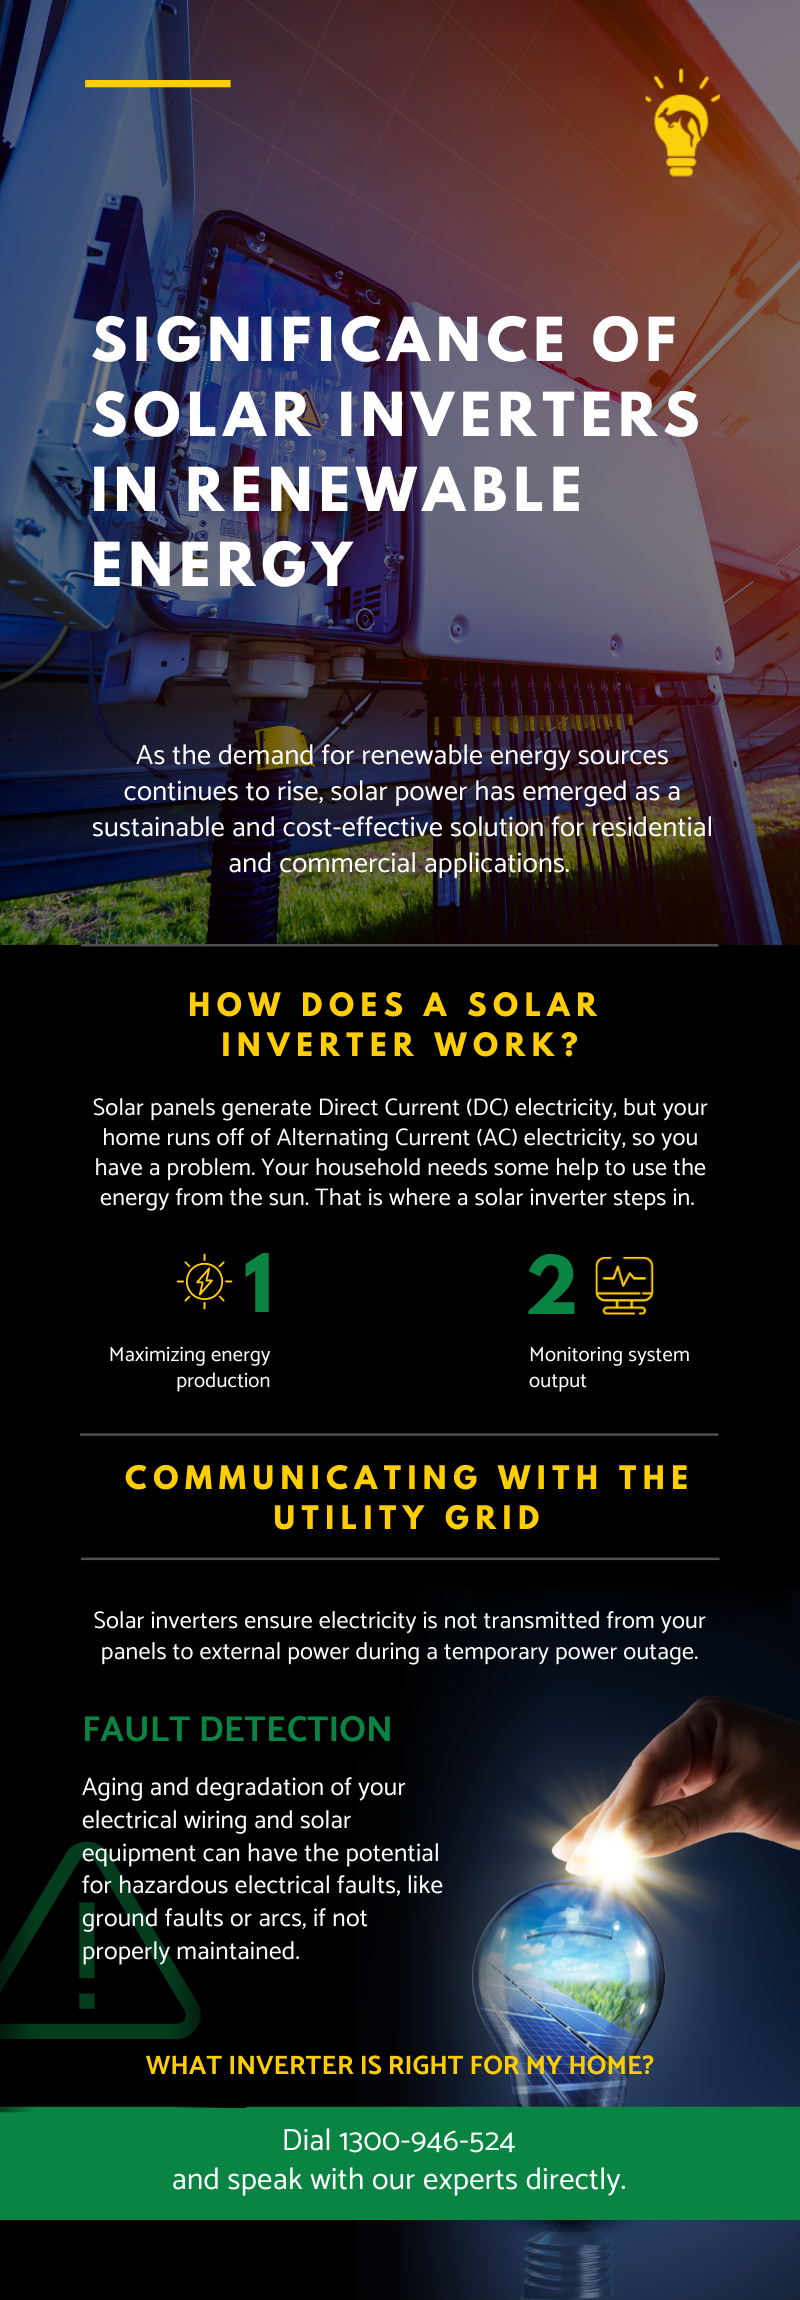 solar inverters guide infographic